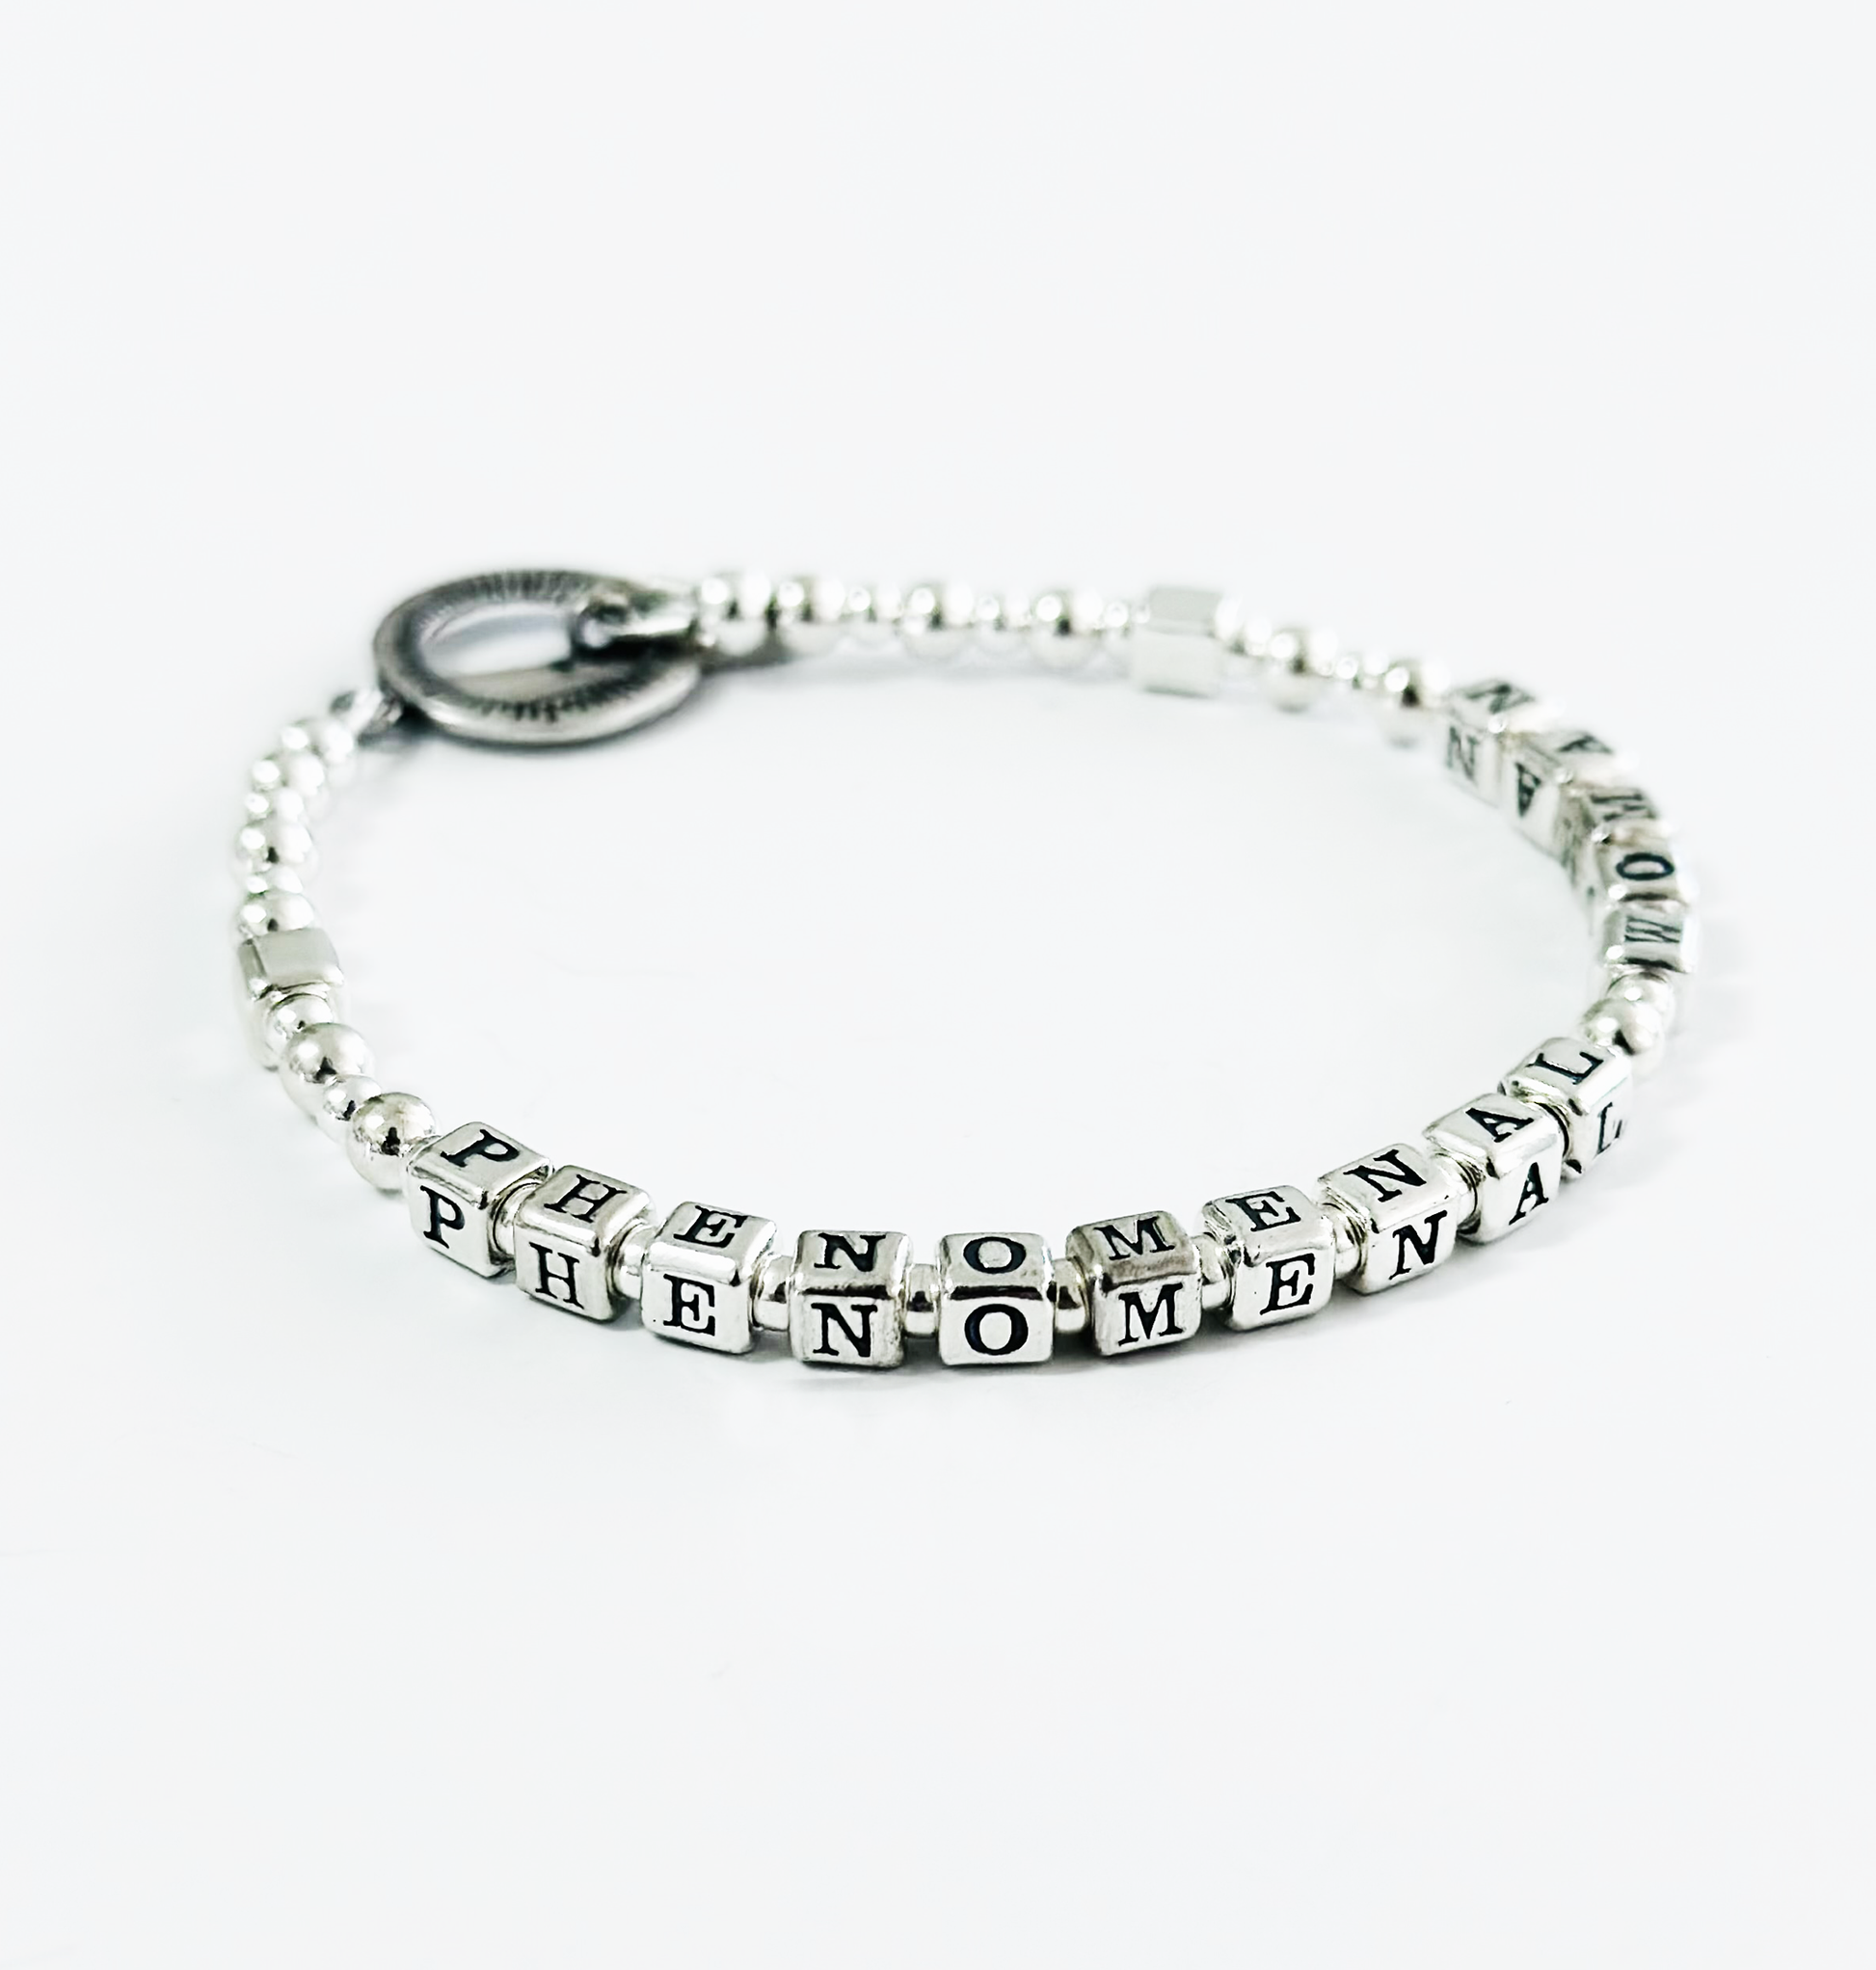 Phenomenal Woman high quality gifting bracelet in all sterling silver beads